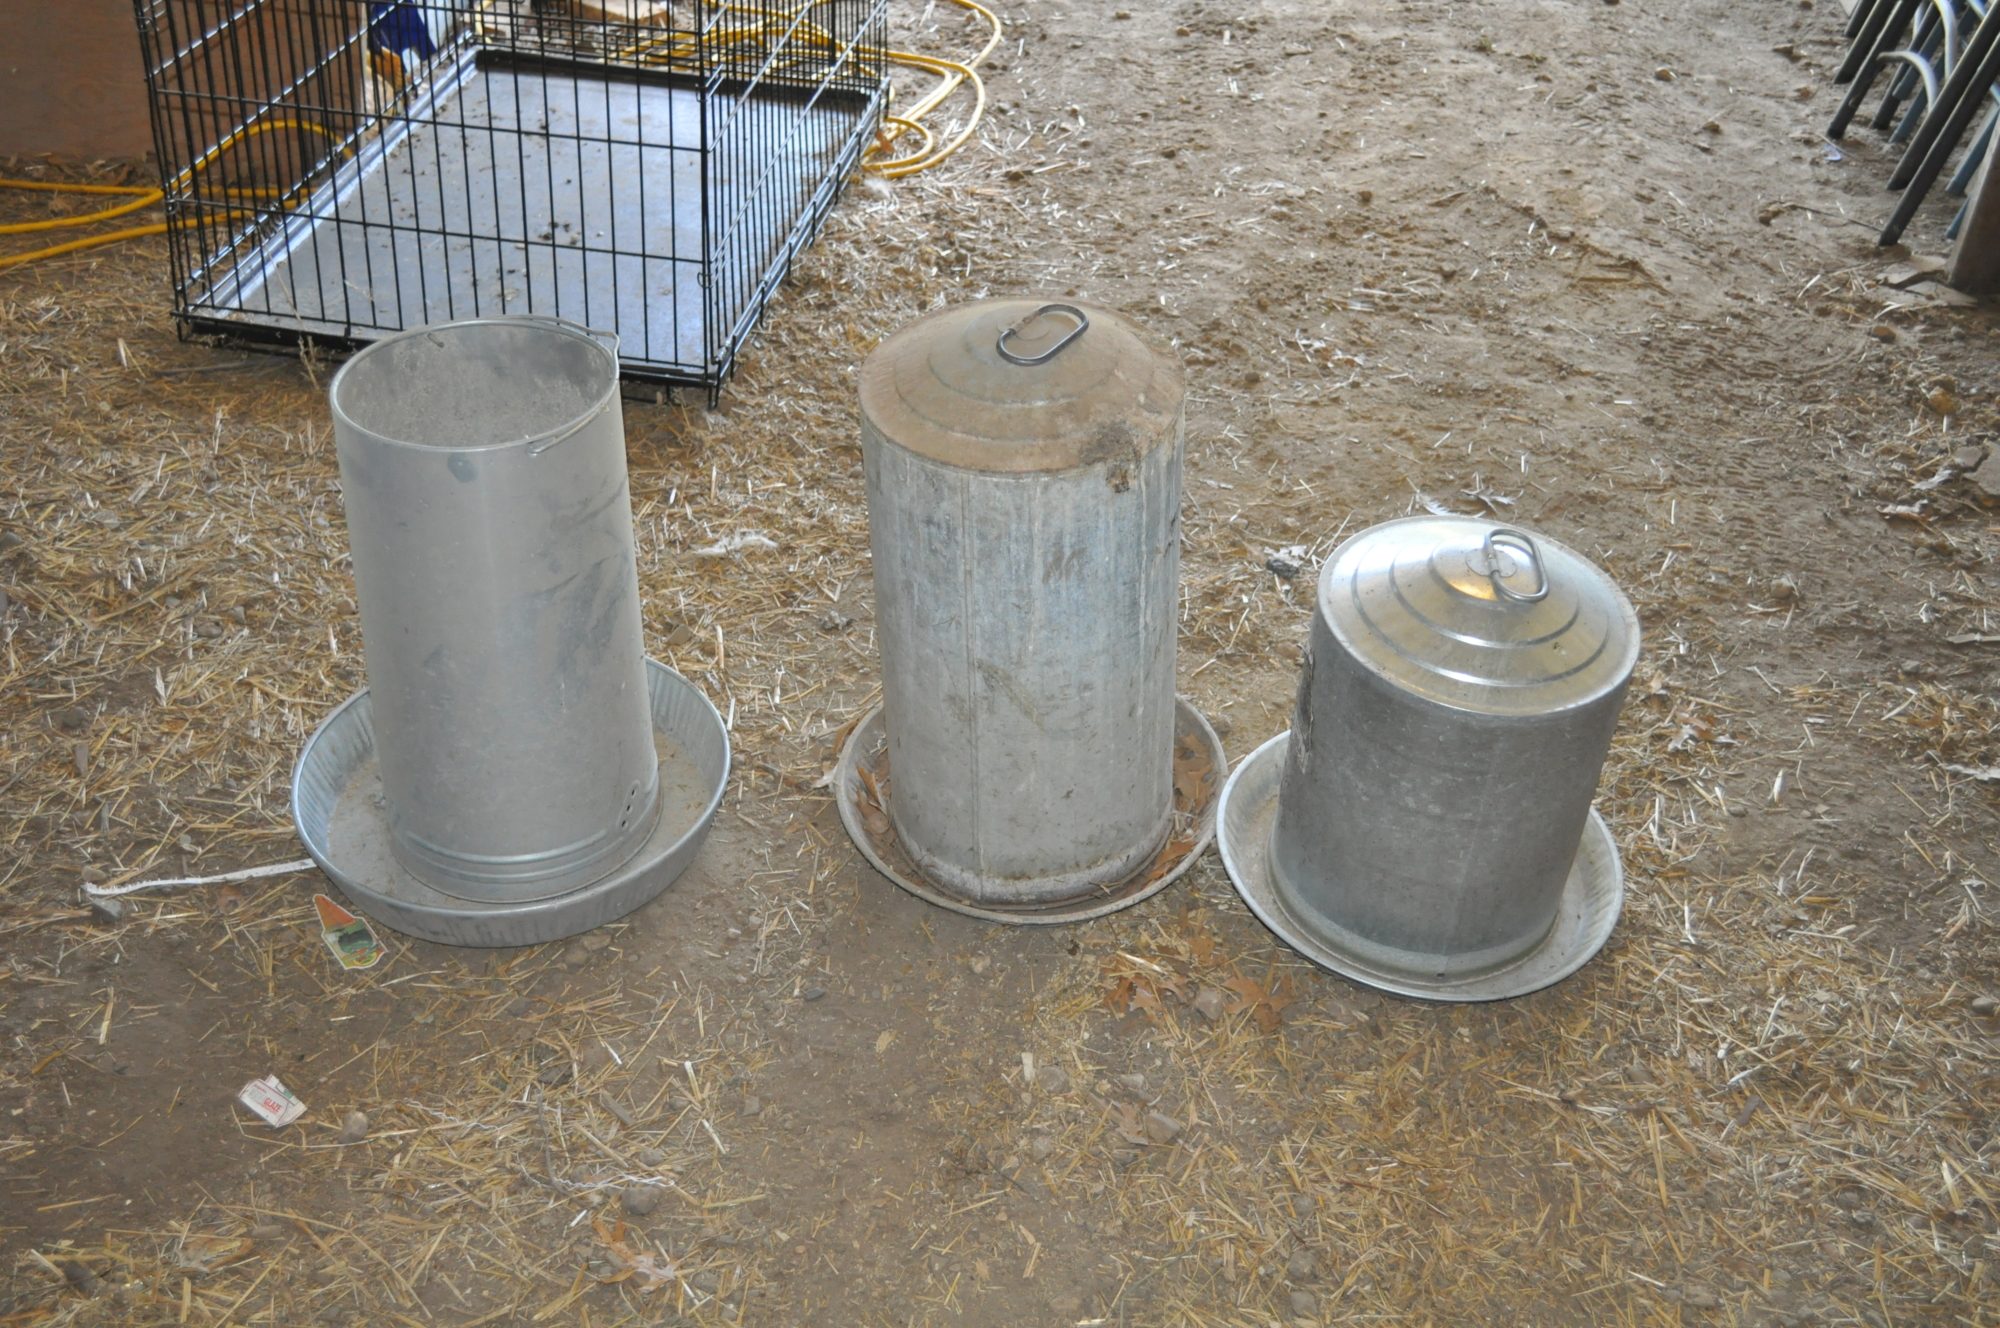 Two on left are water's.  One on right is feeder.  I do have at least one heated base for winter time use with the water's.  I may also have a second one, but would have to dig for it.